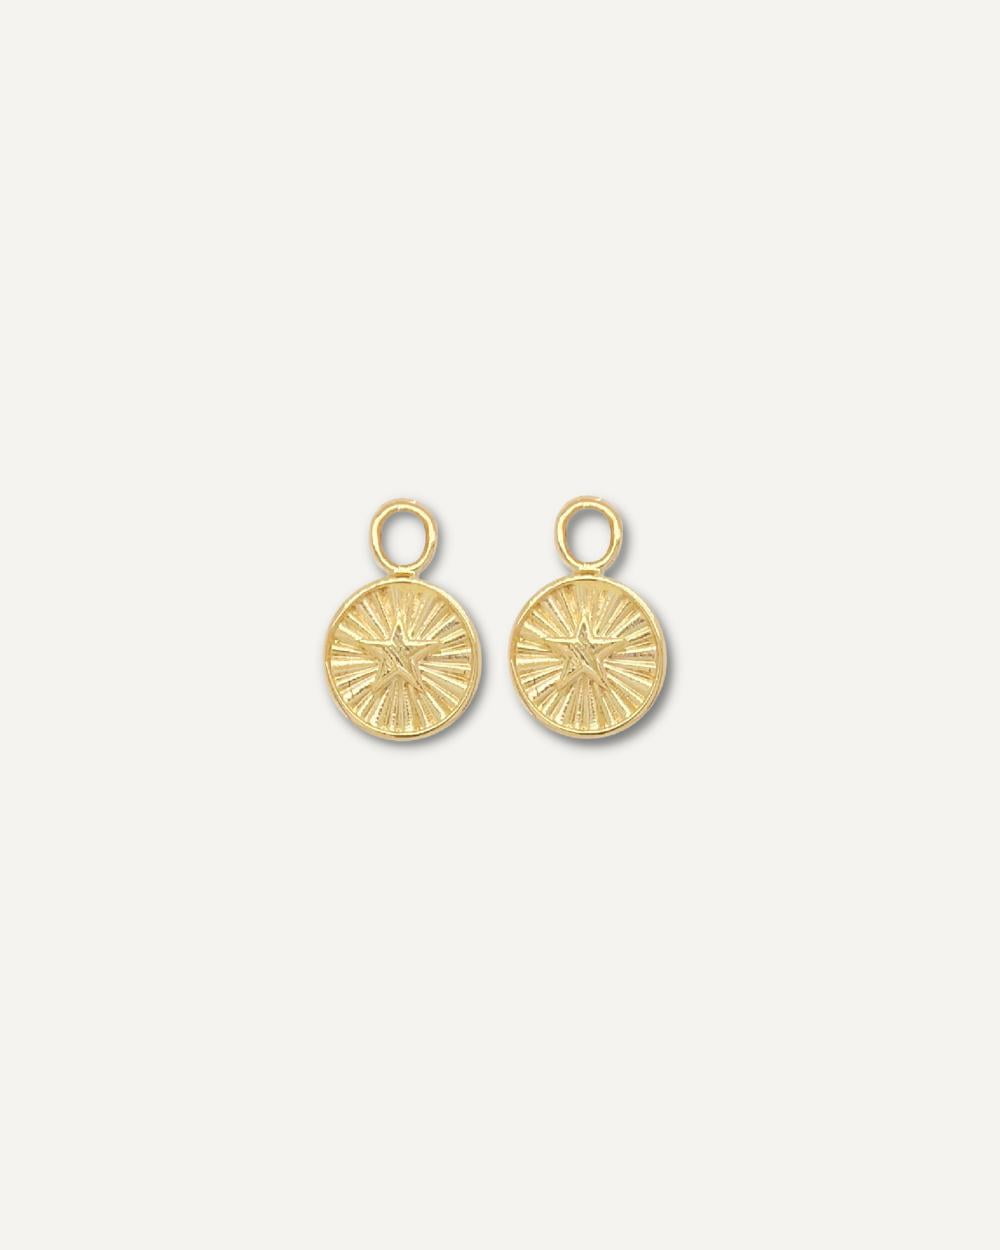 Gold star shaped earring charms on cream background.